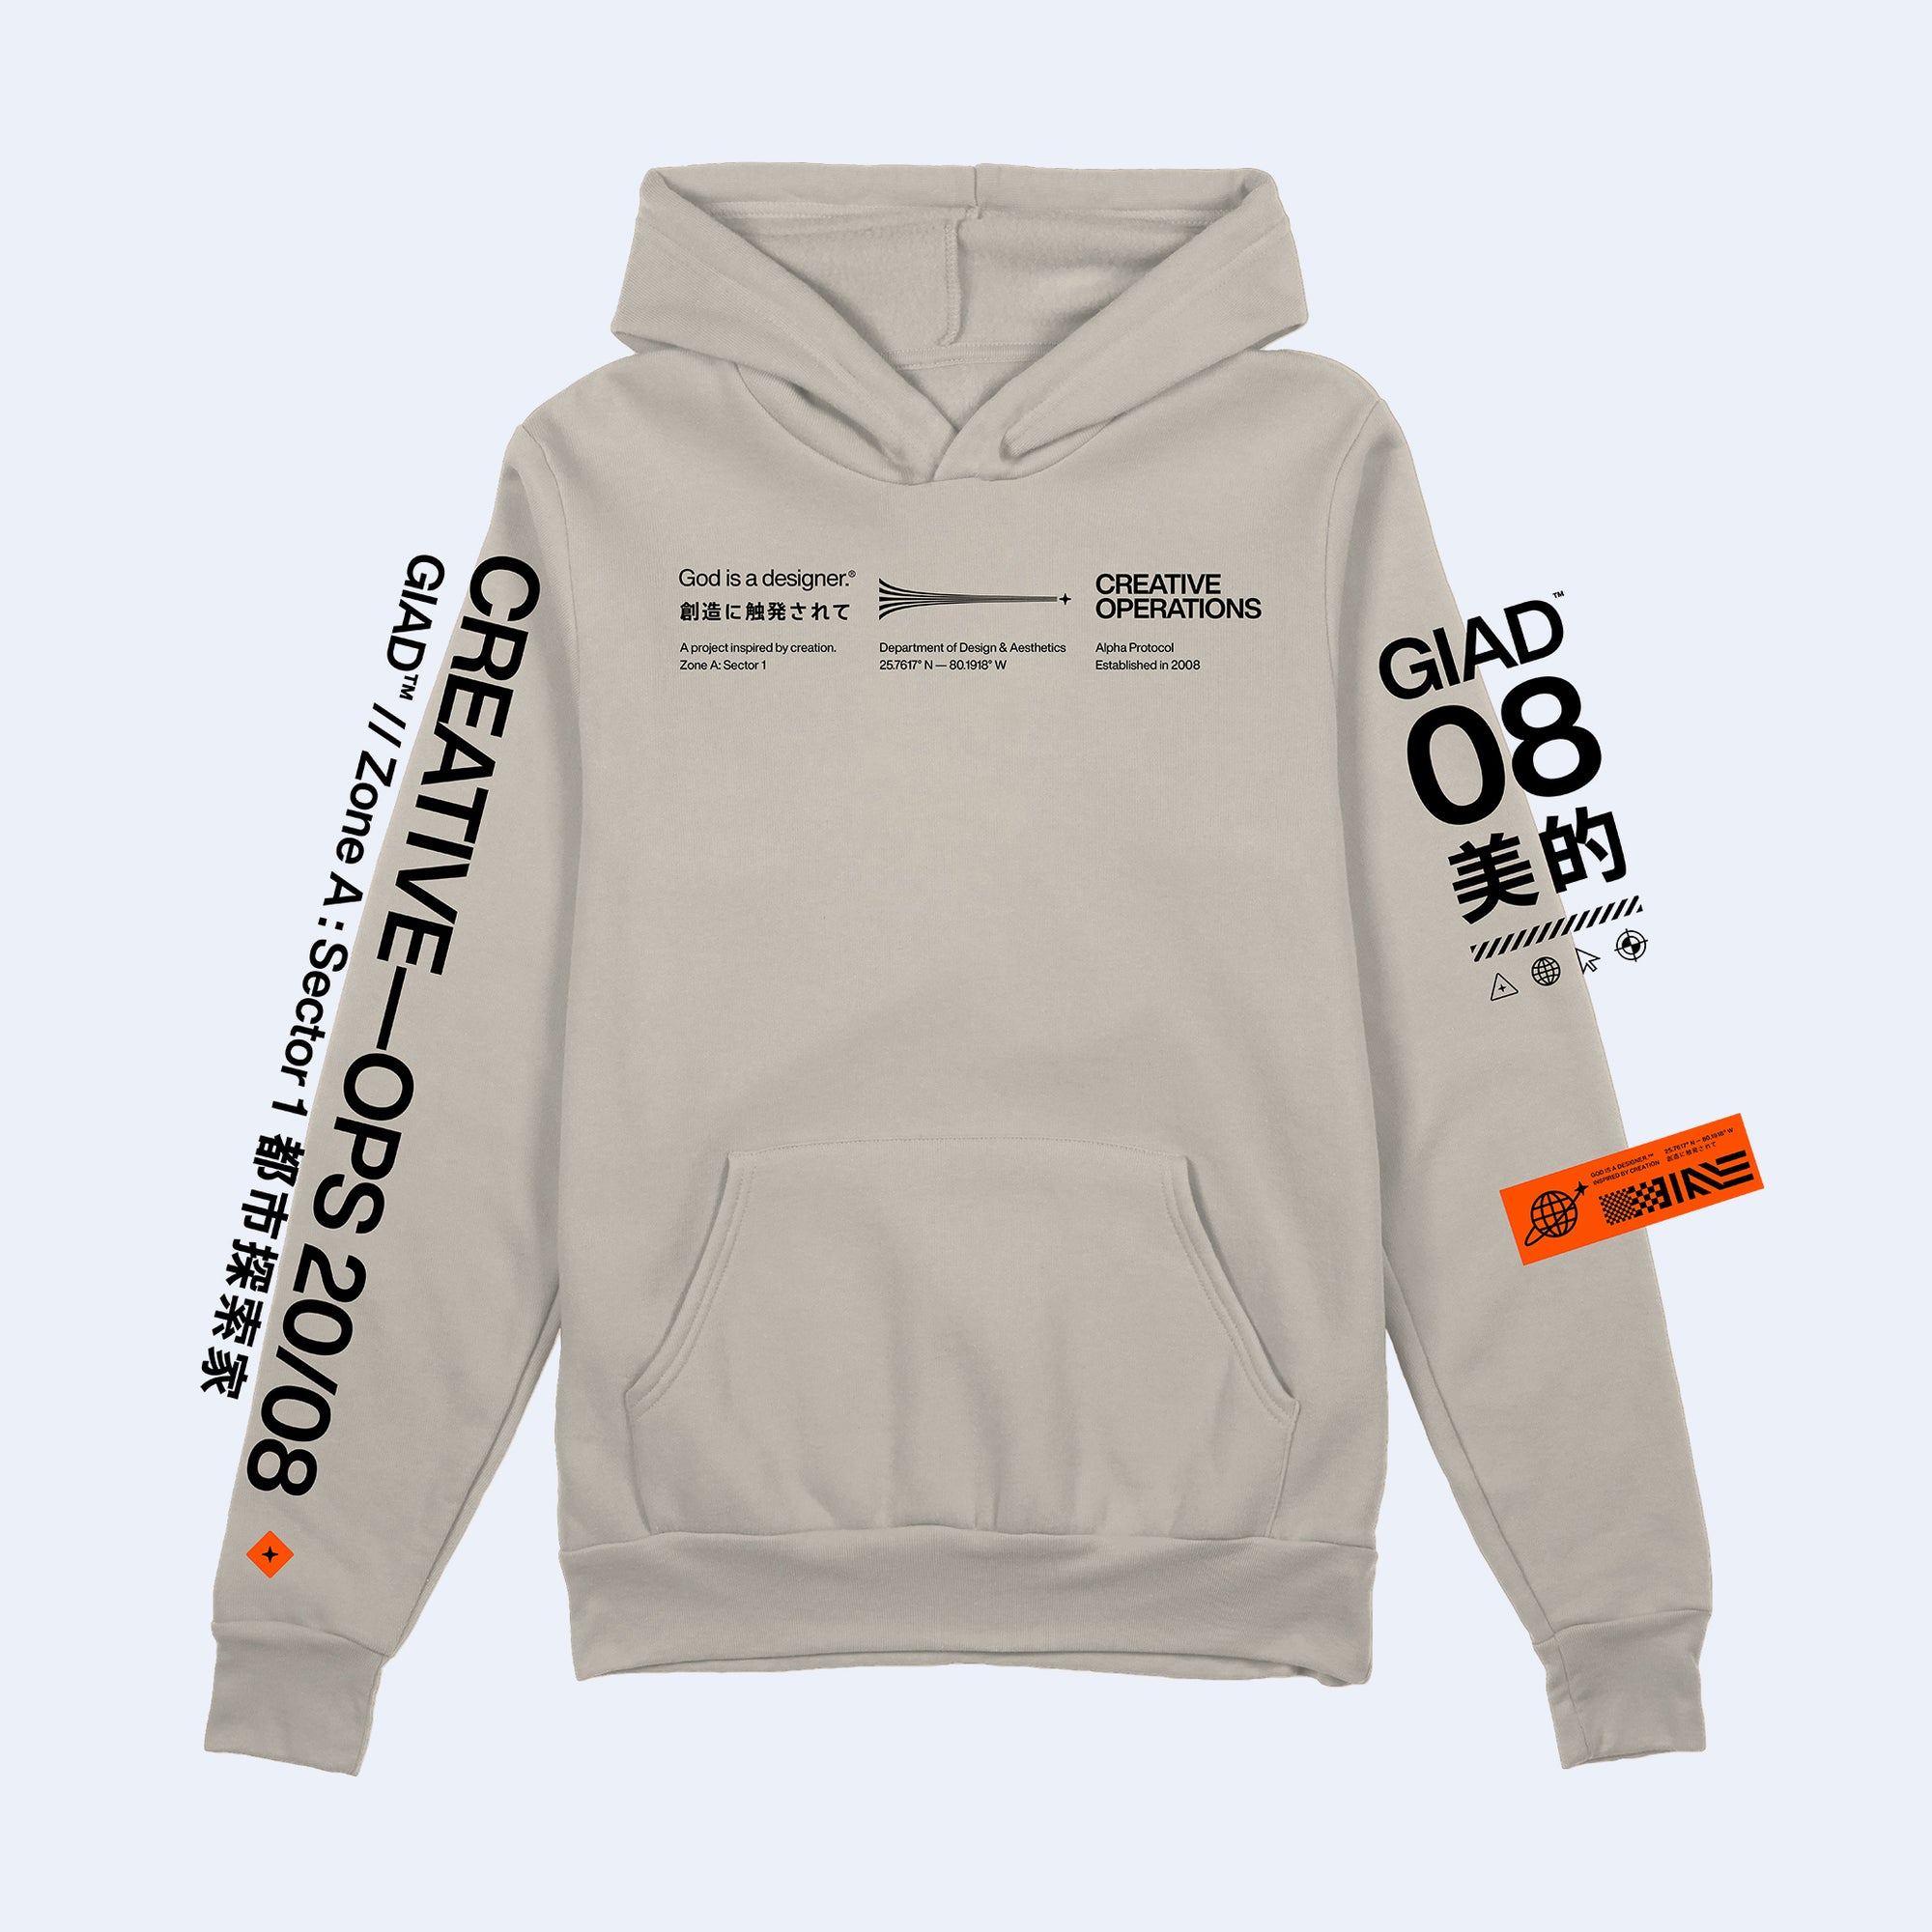 GIAD™ Creative Operations Hooded Pullover [Sand] - God is a designer.®